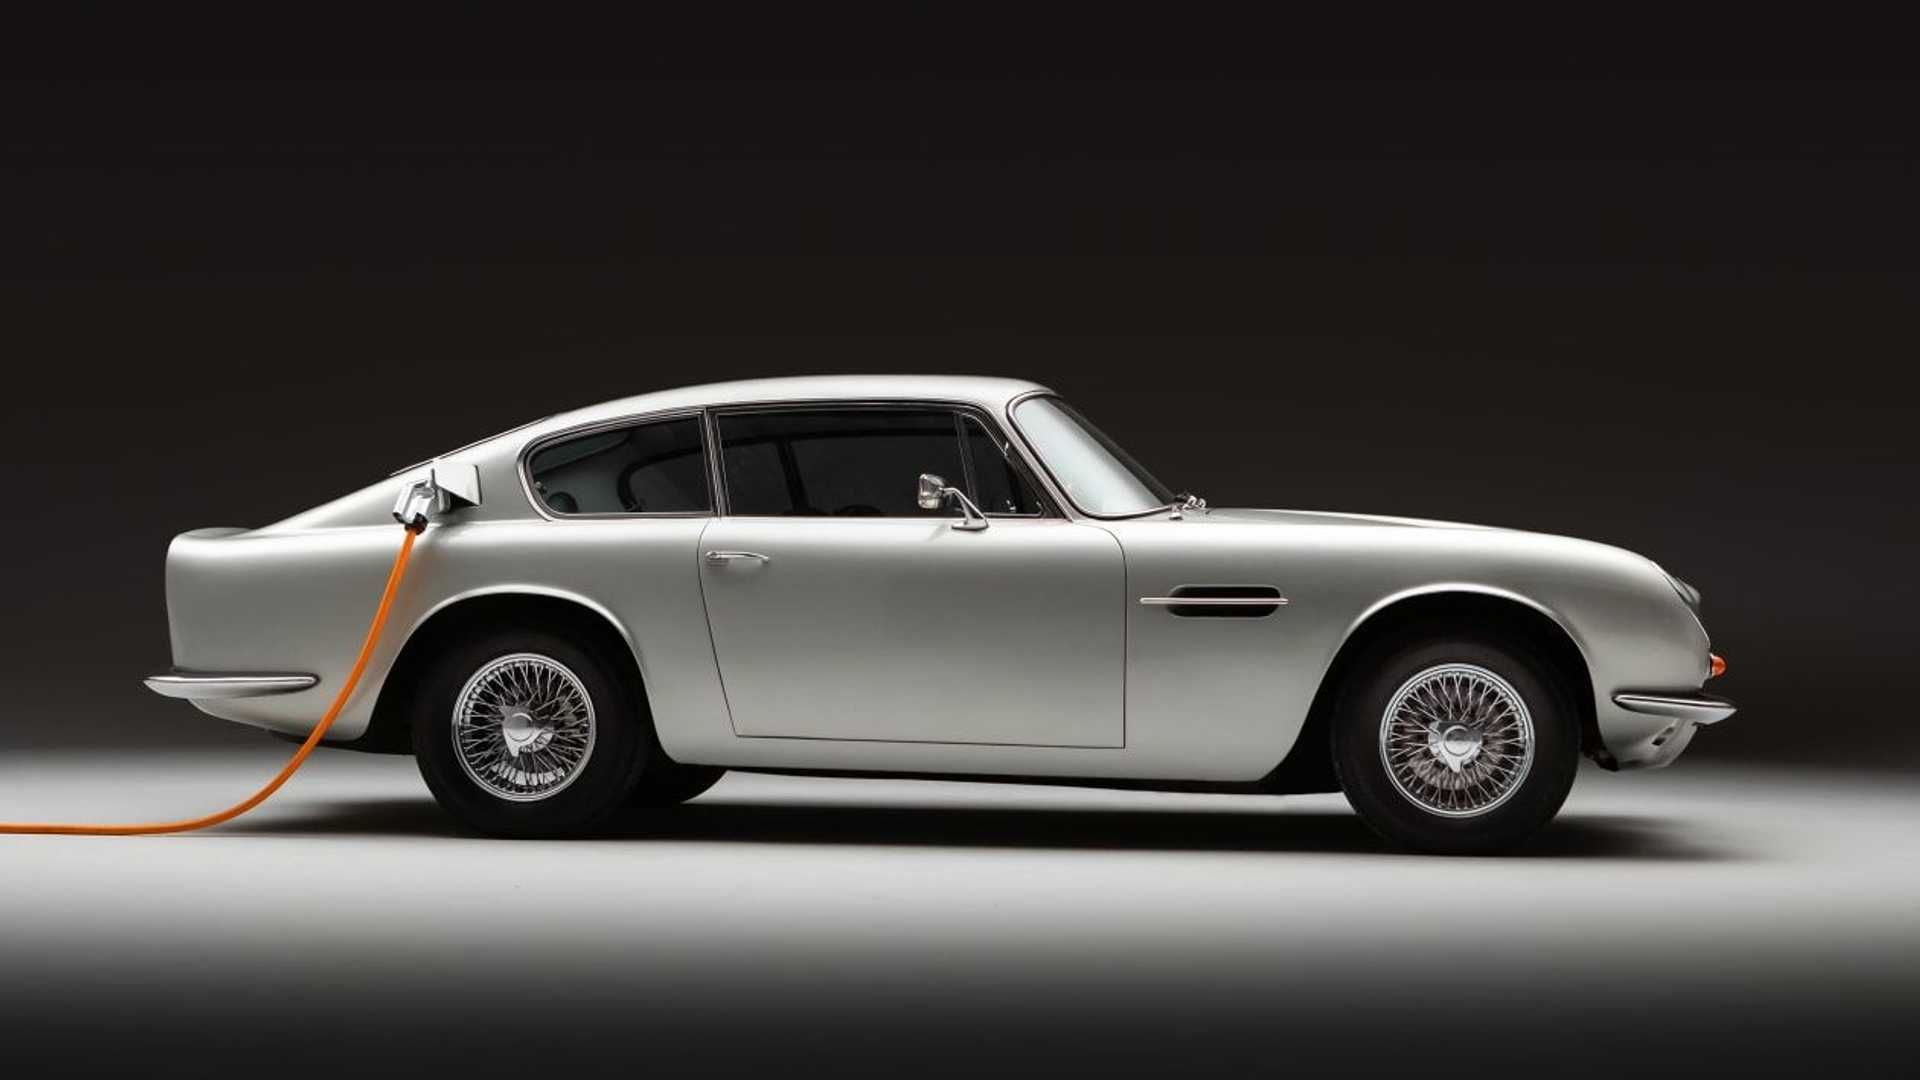 The Side View Of The Lunaz Design Aston Martin DB6